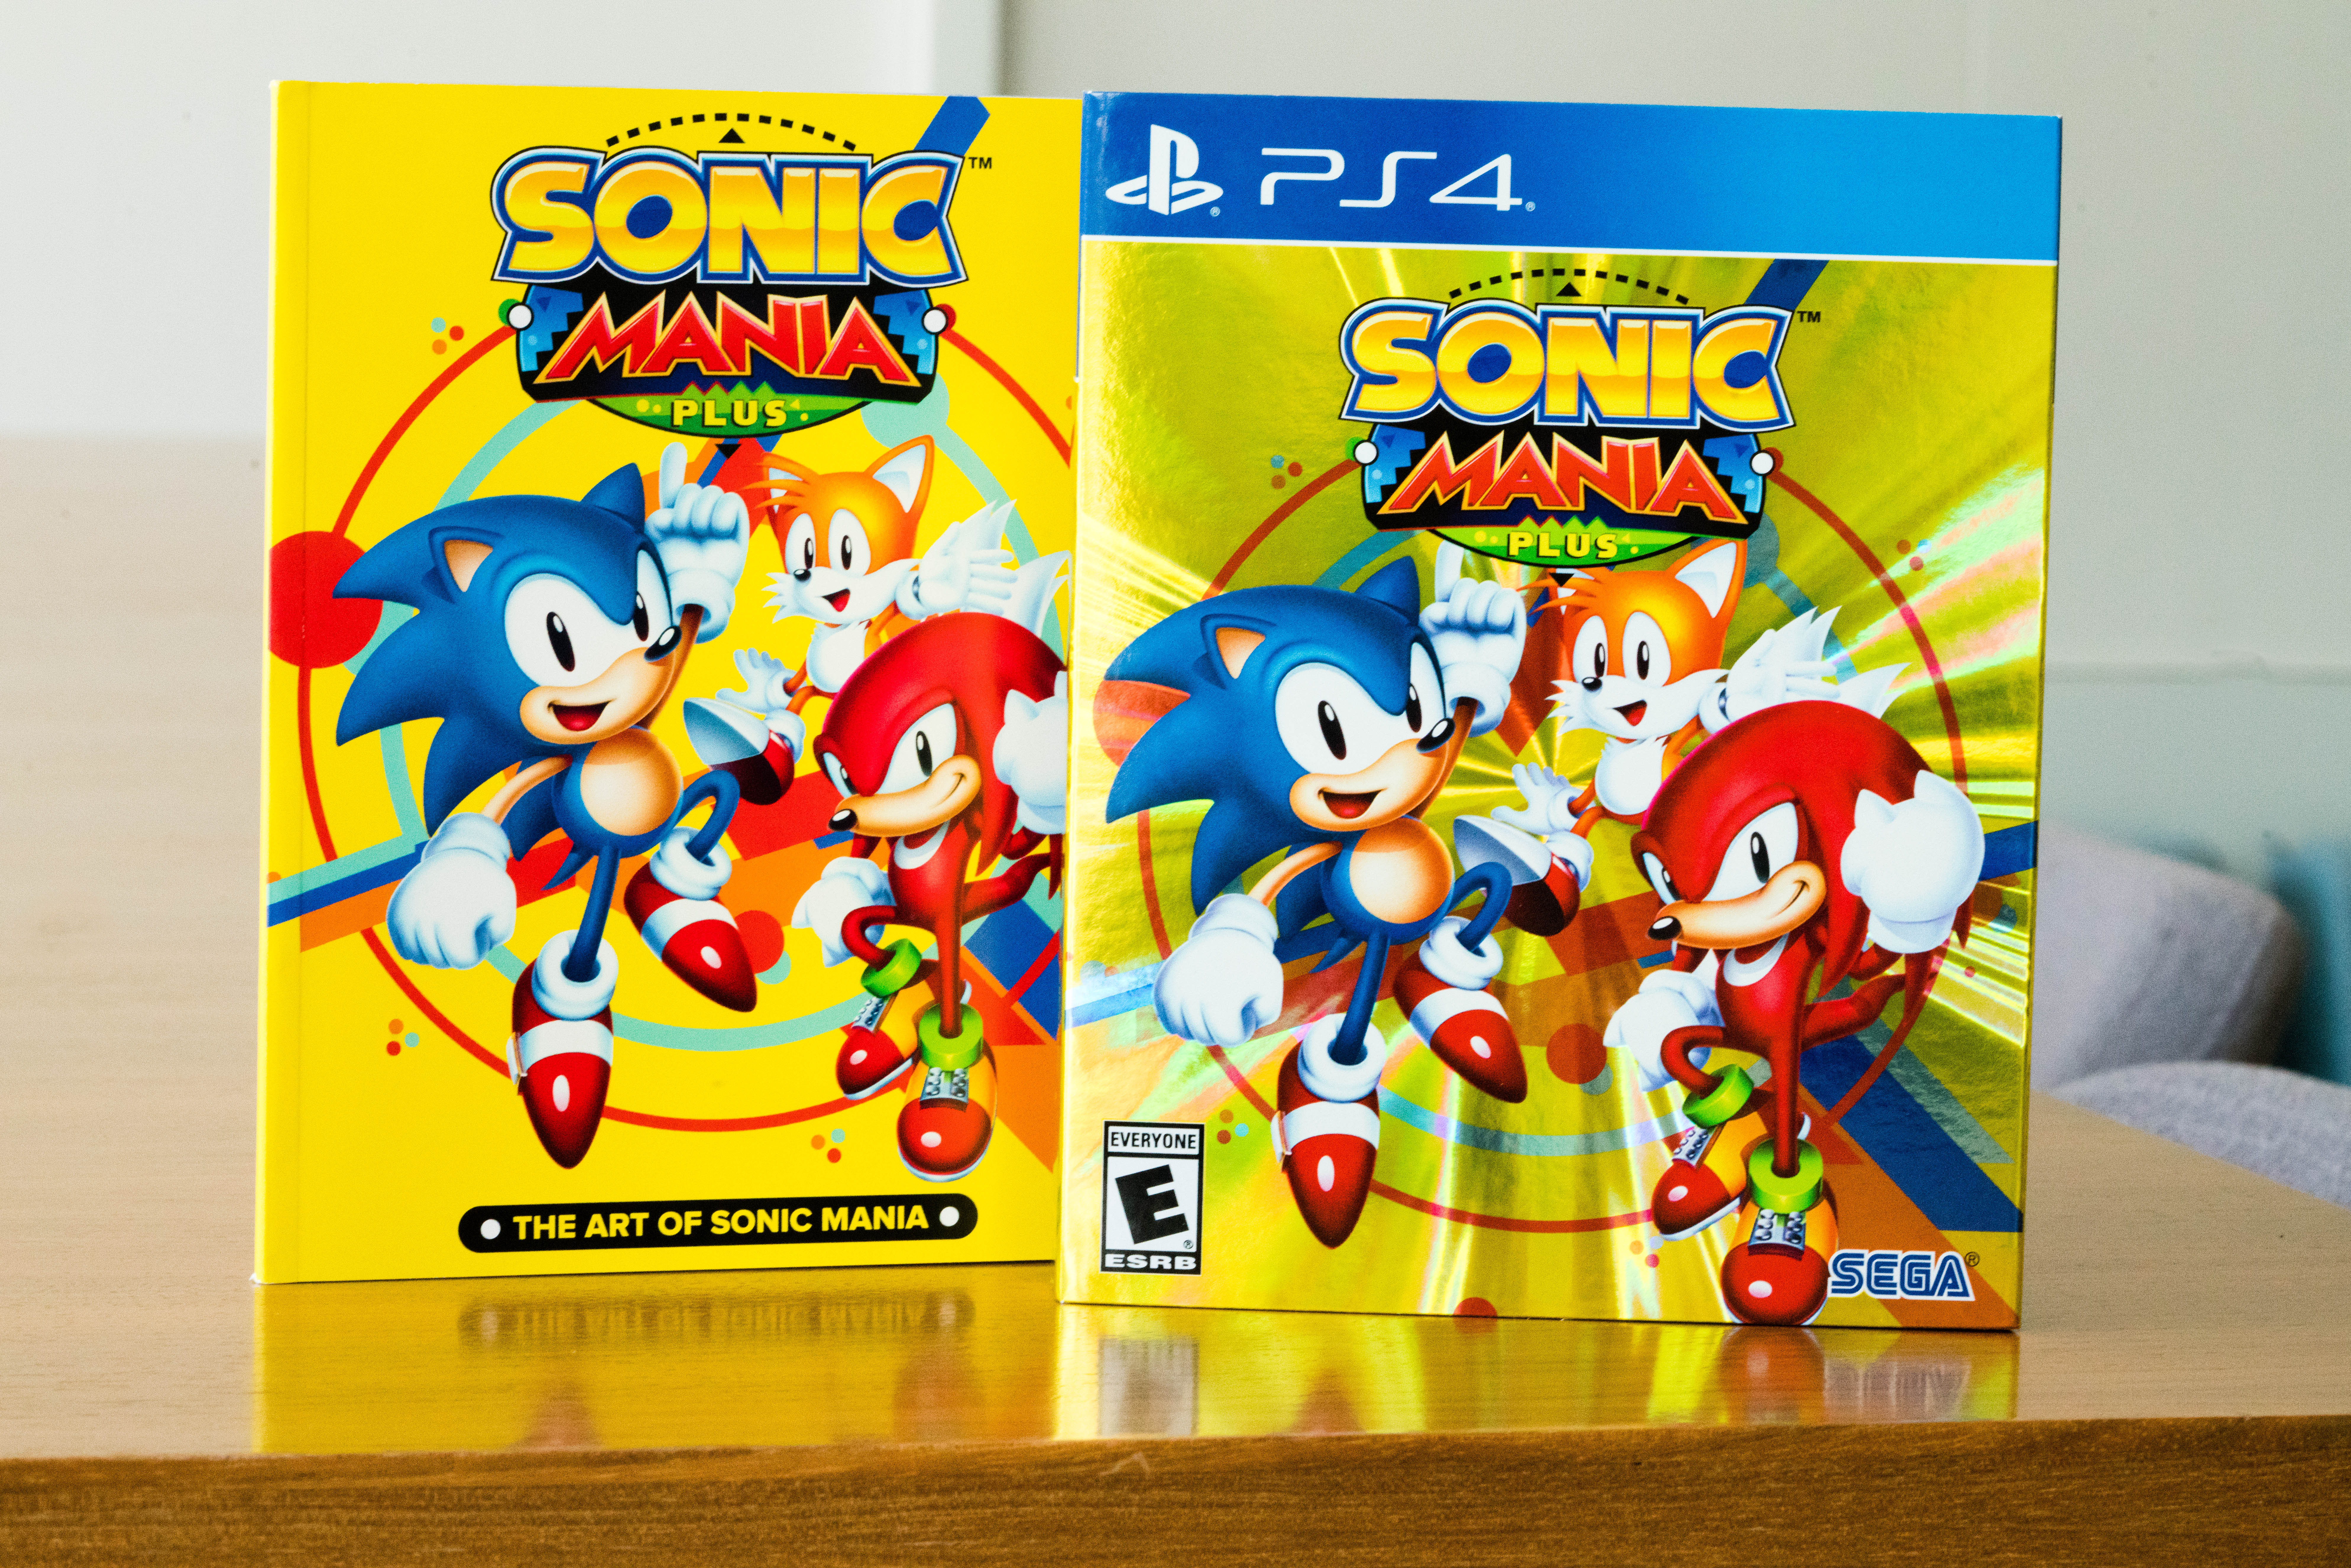 Sonic Mania Plus Collector's Edition